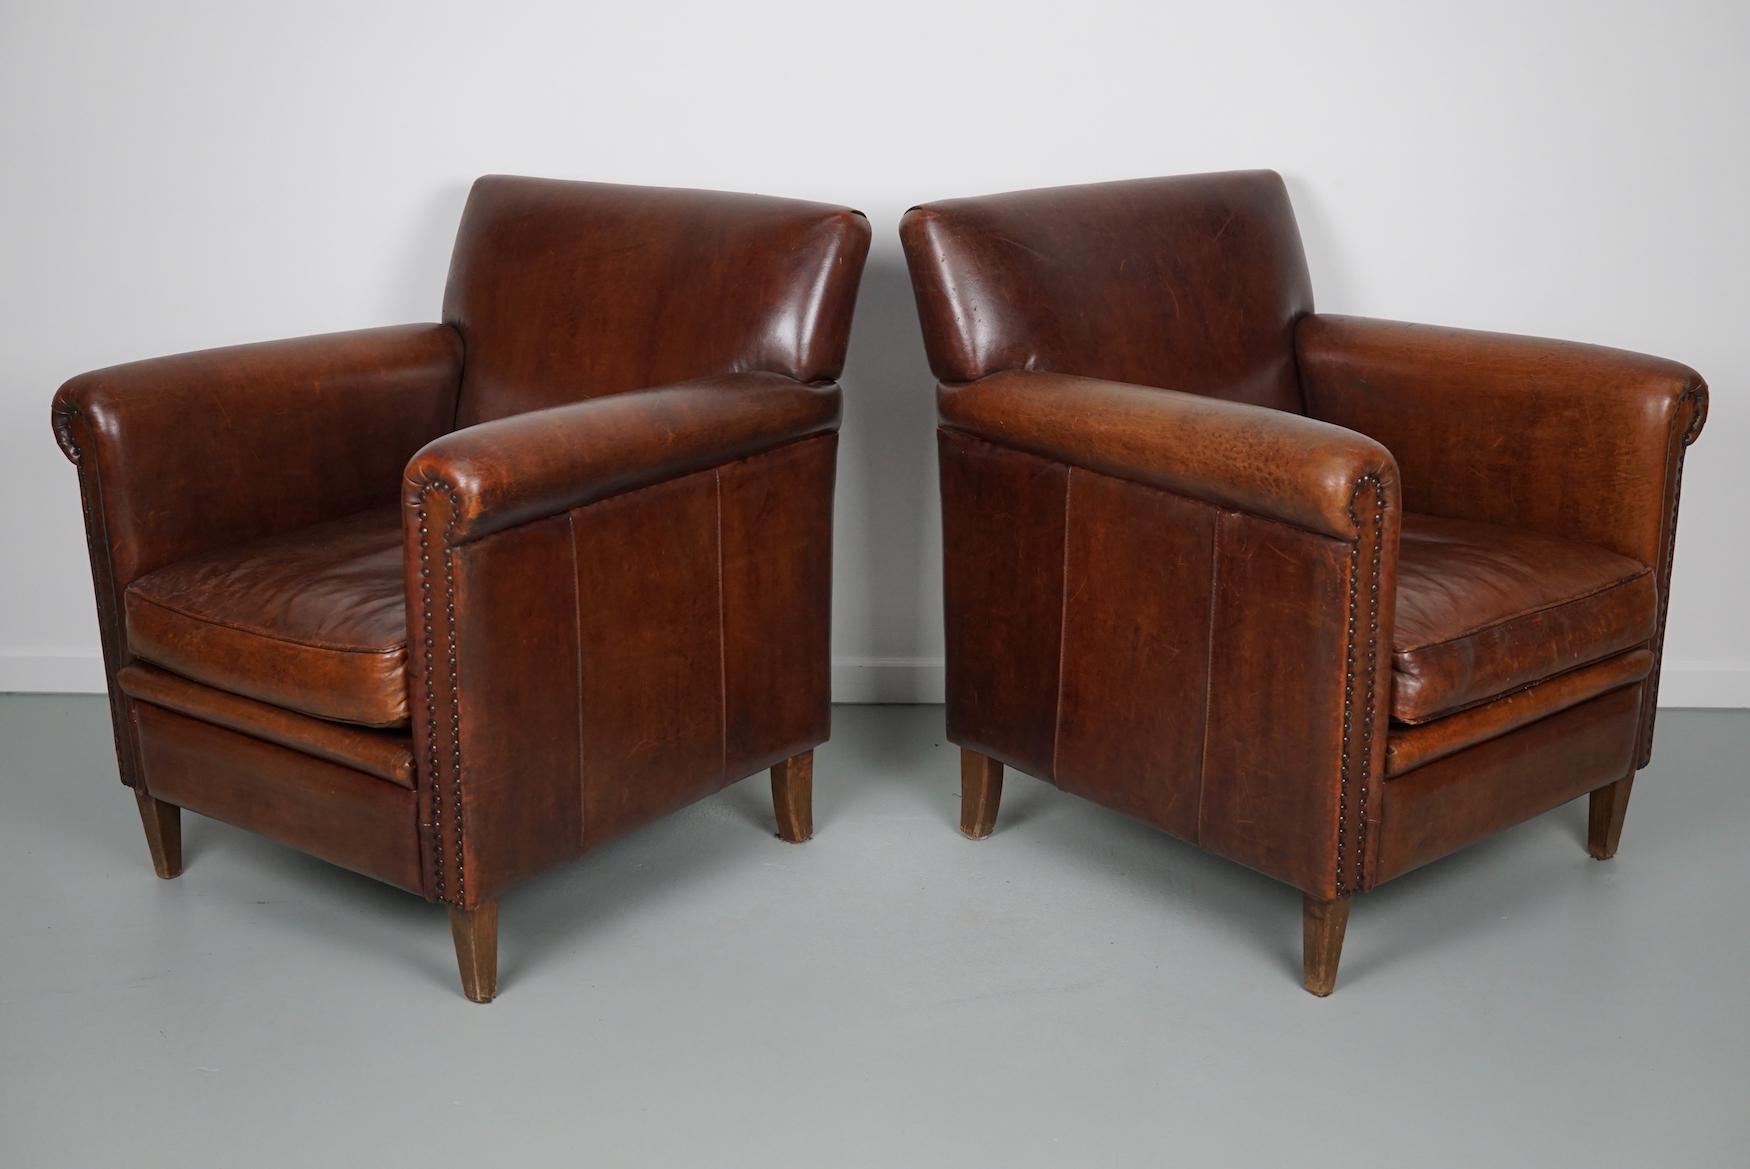 This pair of cognac/burgundy-colored leather club chairs come from the Netherlands. They are upholstered with hand patinated leather and feature nails and wooden legs.